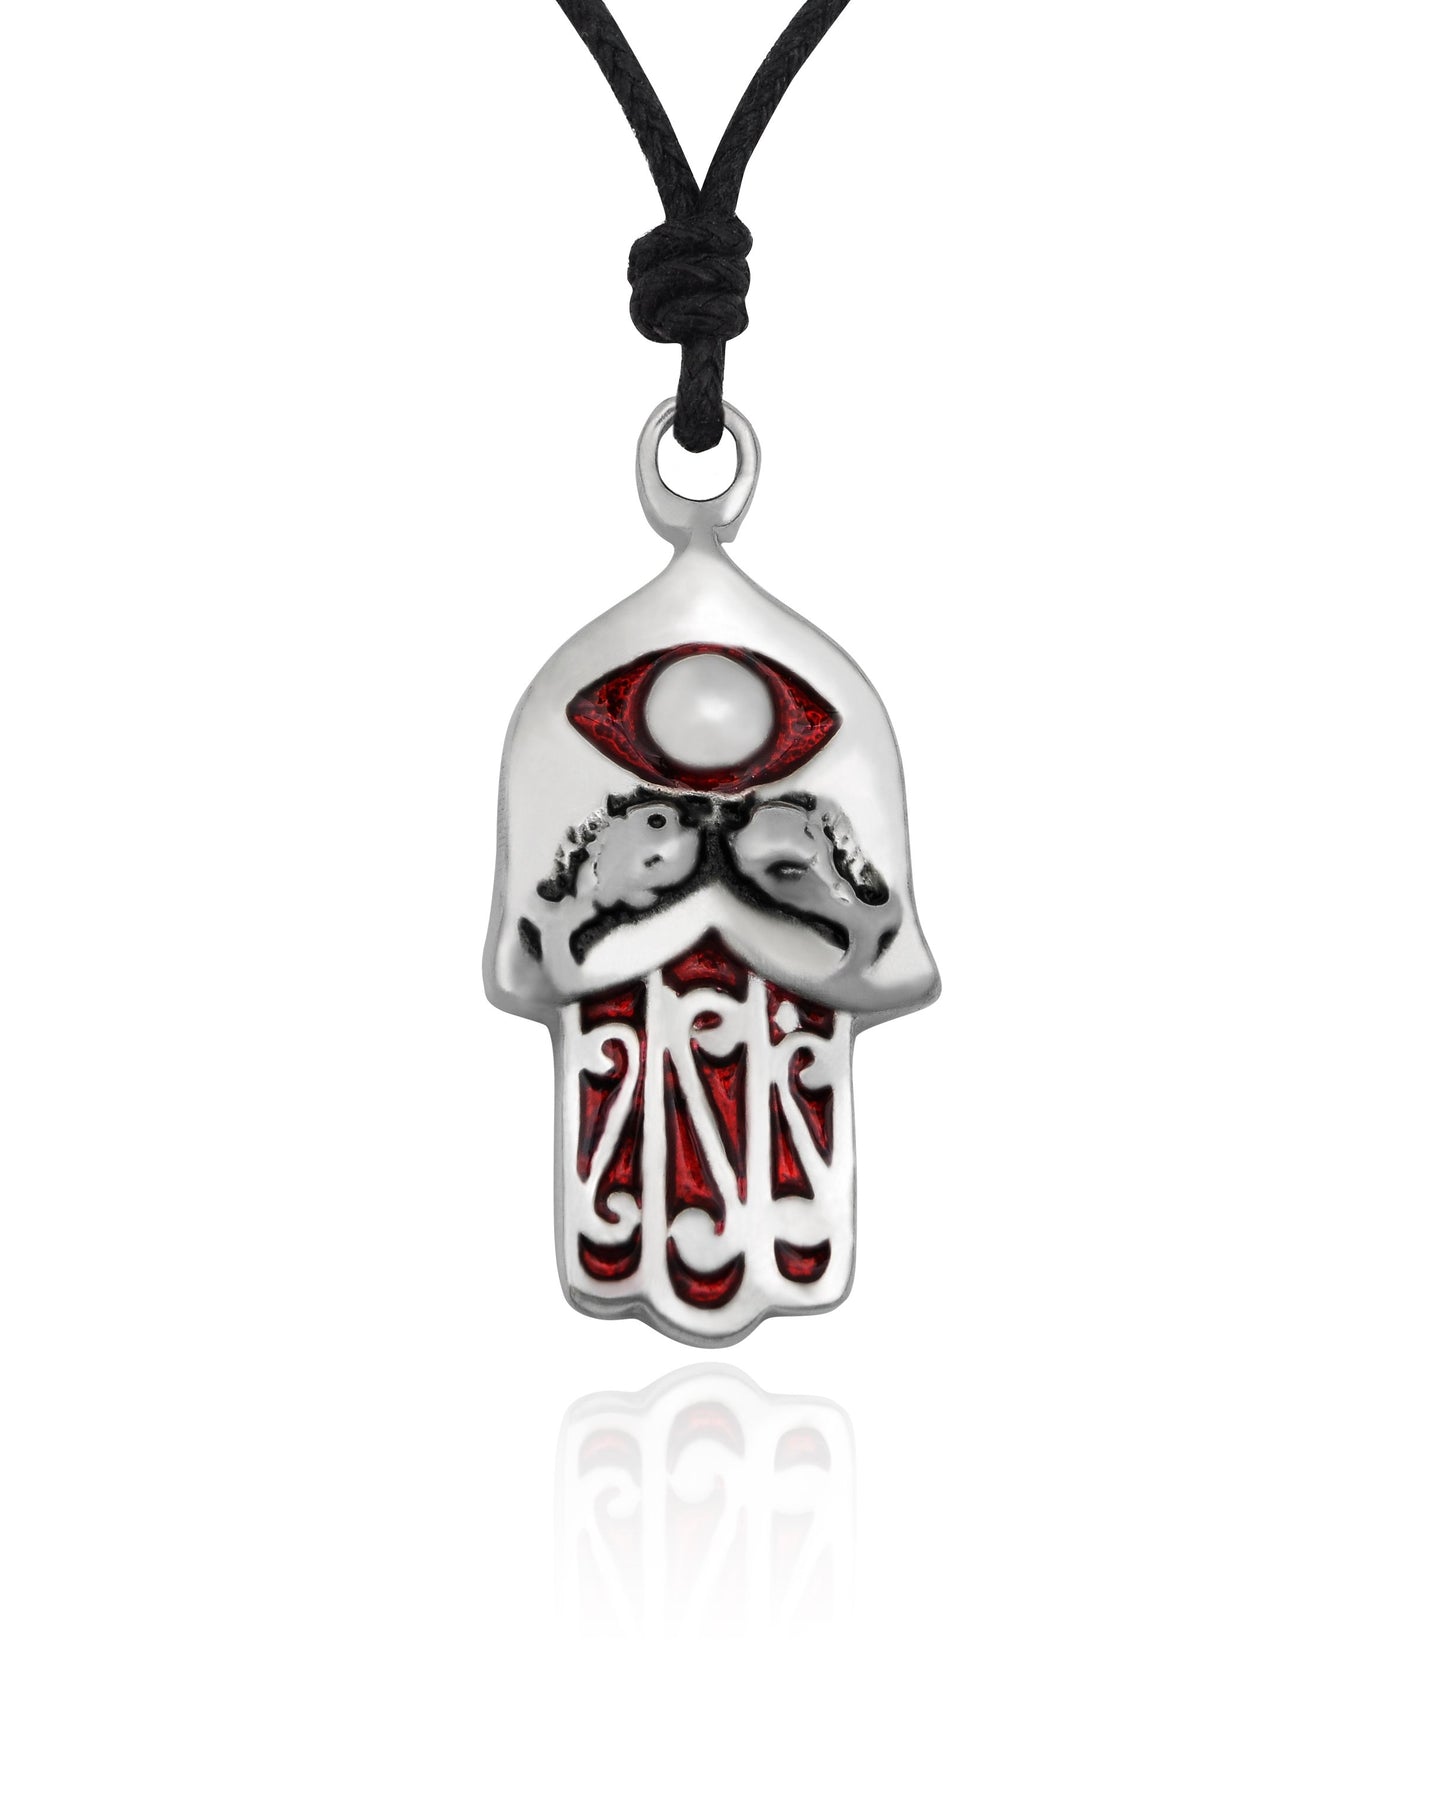 Colorful Hamsa Silver Pewter Charm Necklace Pendant Jewelry